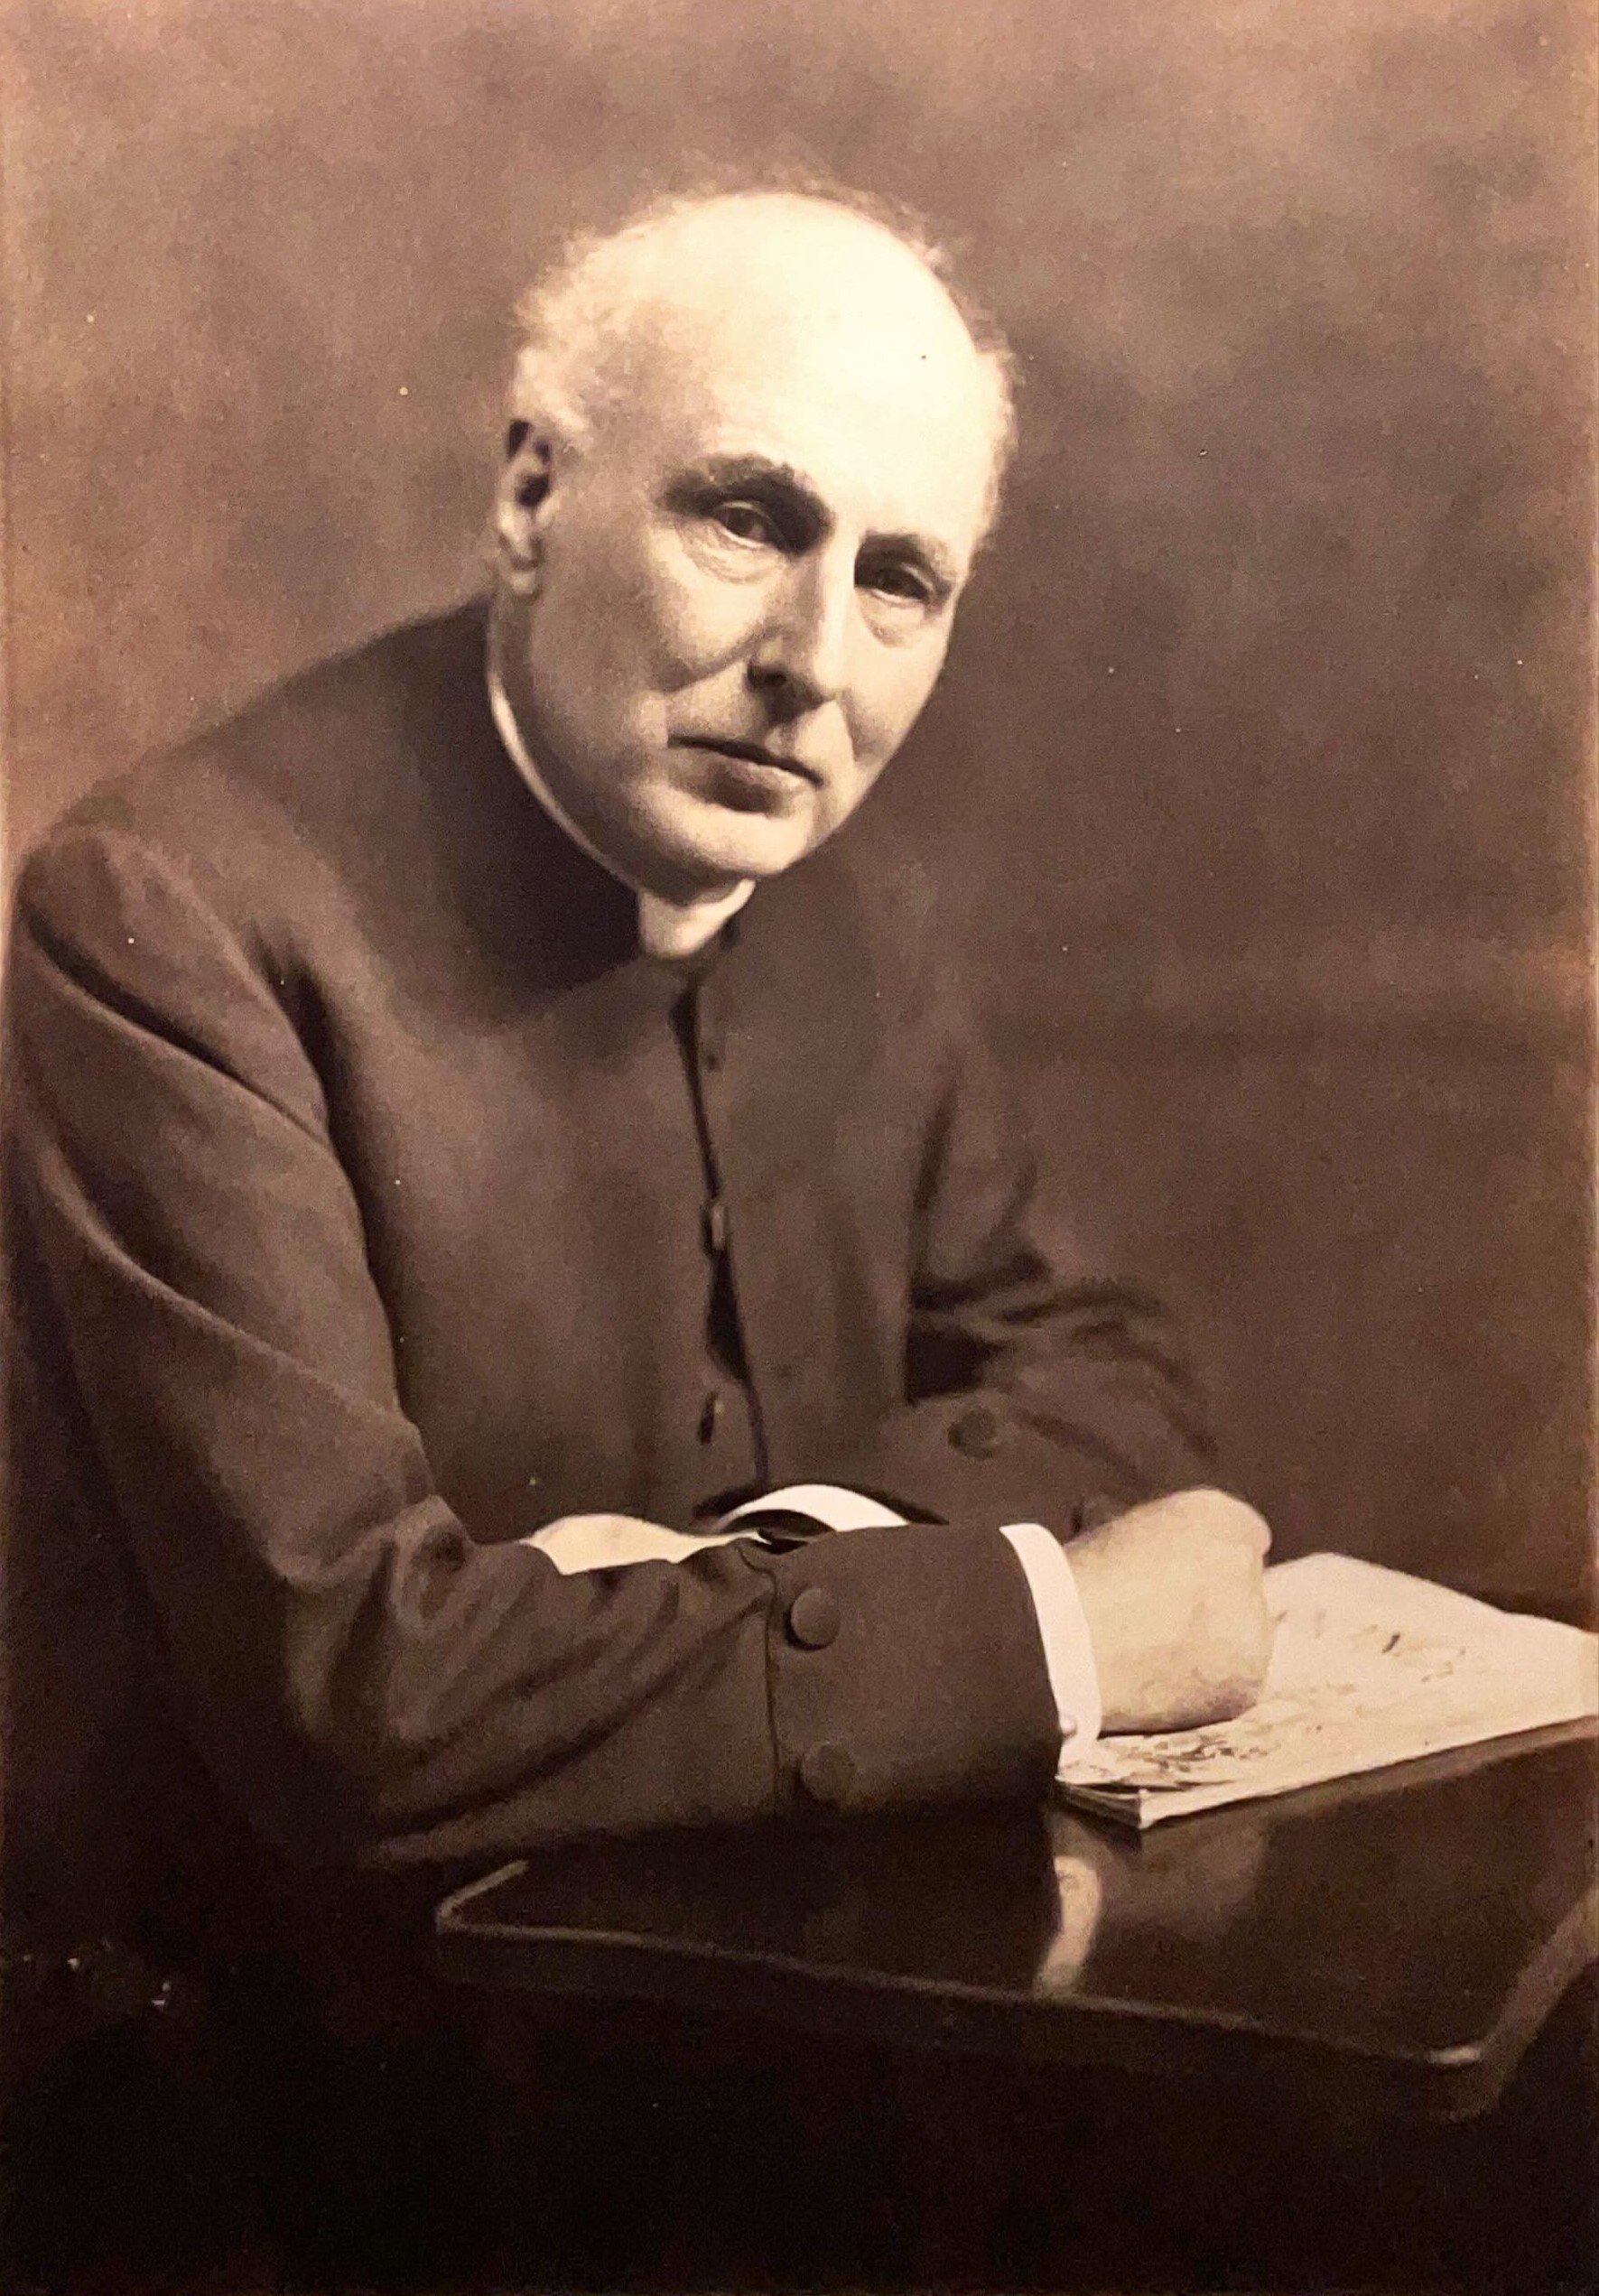 D. Tait, Honorary Canon 1915-1932